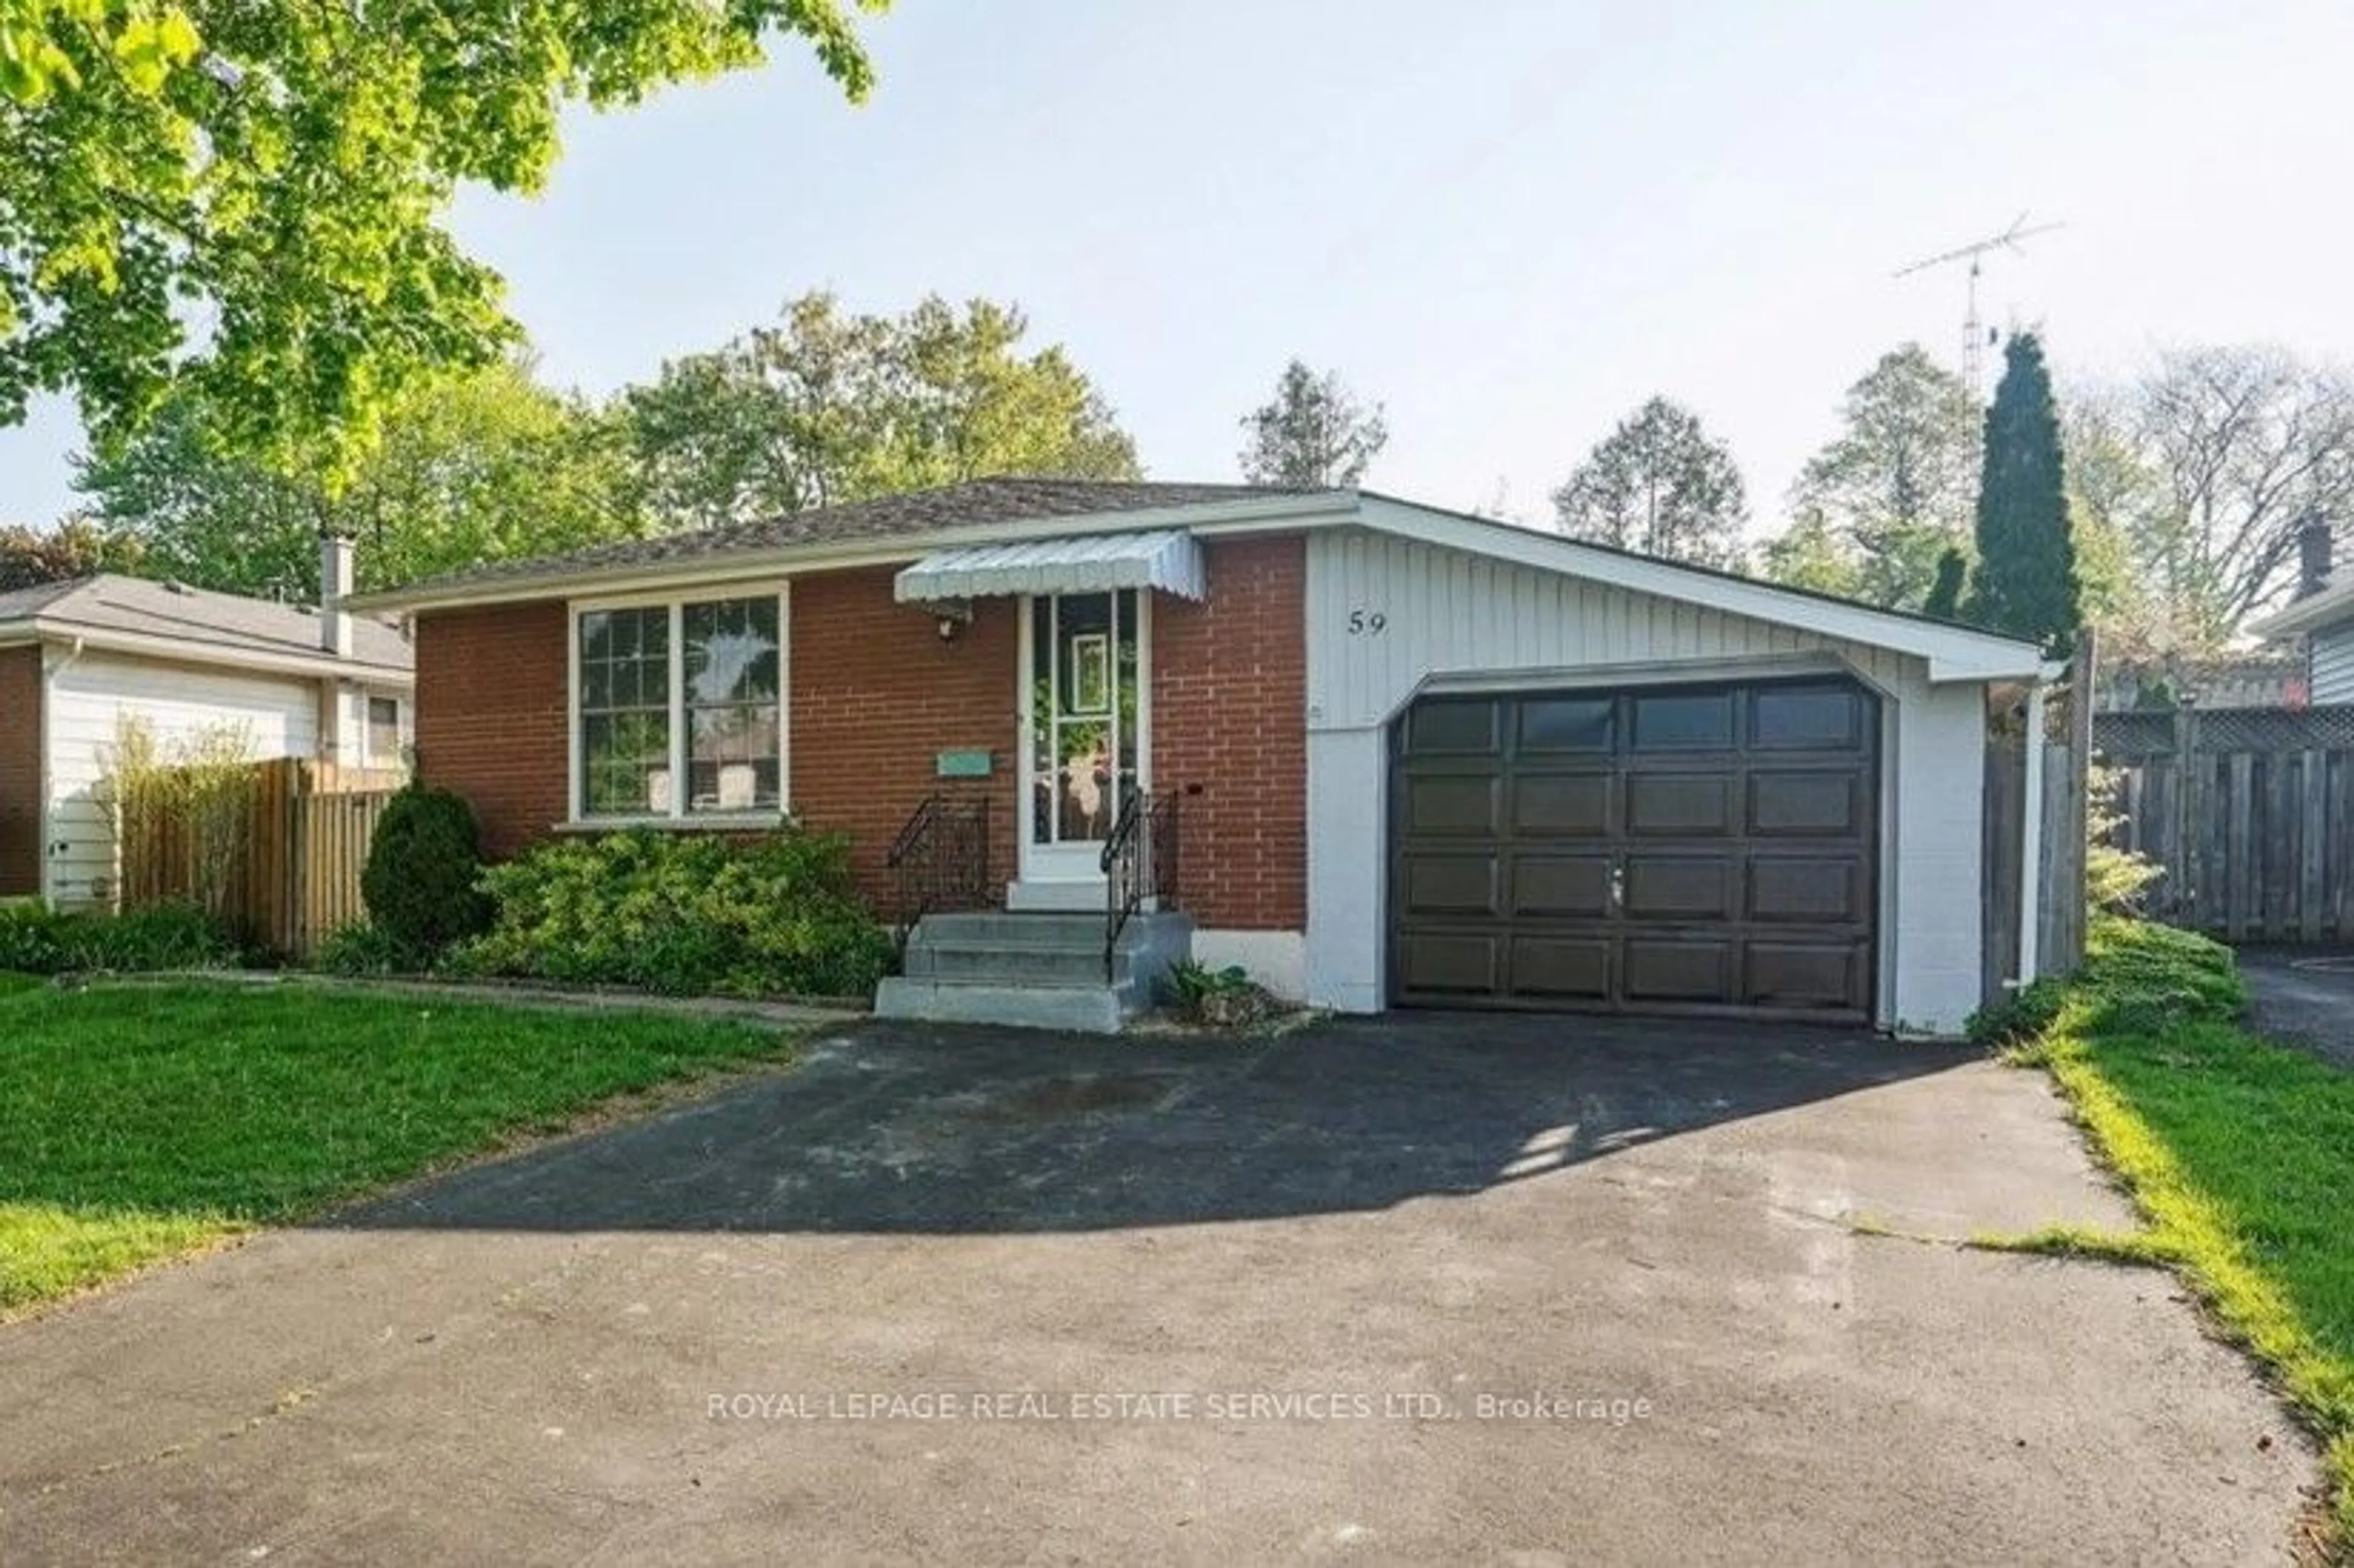 Home with brick exterior material for 59 Birchcliffe Cres, Hamilton Ontario L8T 4K6